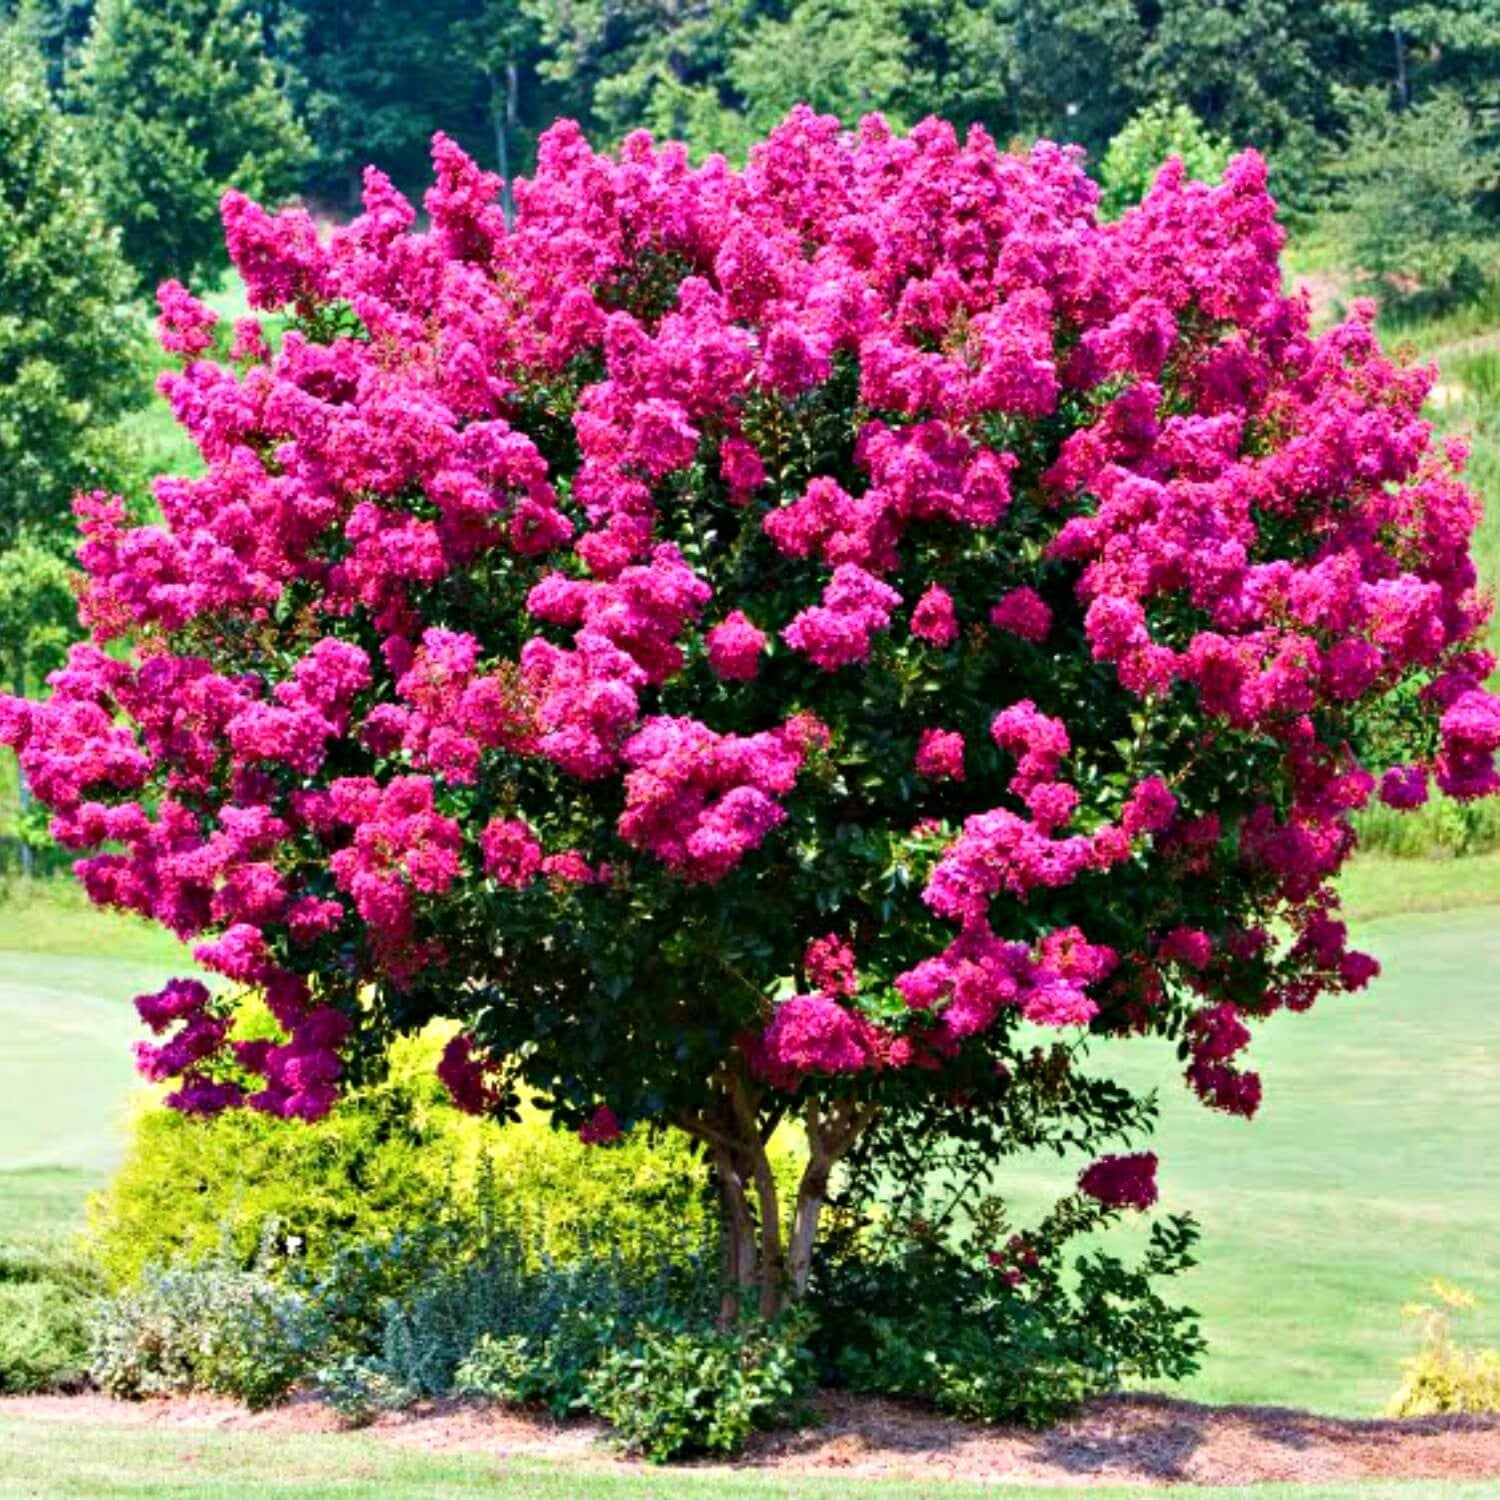 Crapemyrtle - Lilac of the South!